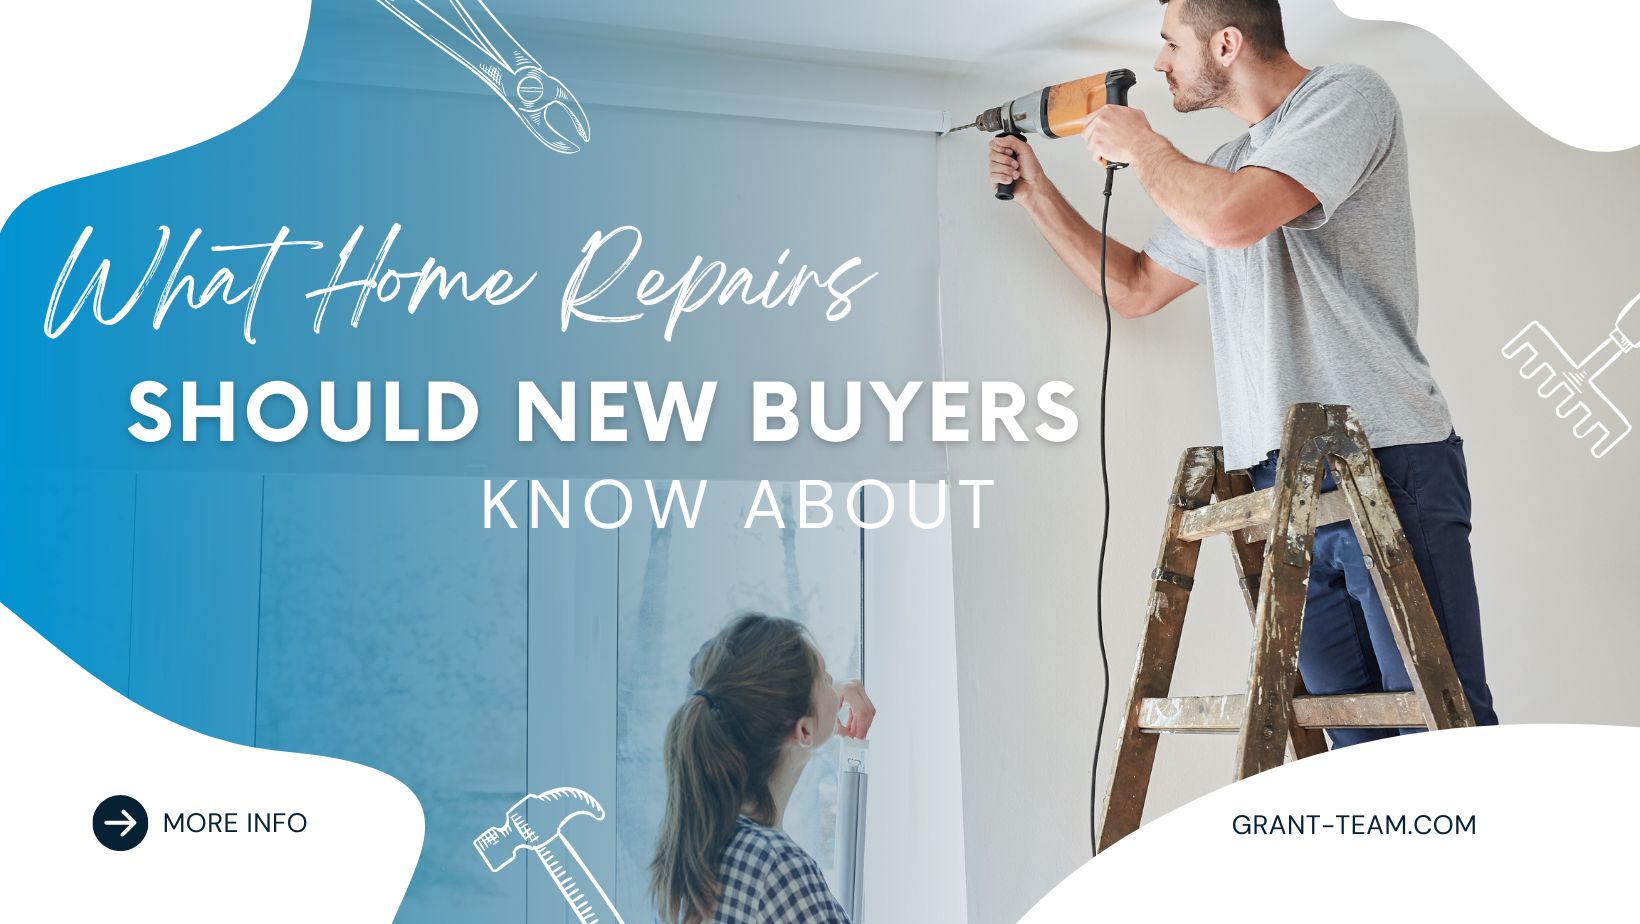 What Home Repairs Should New Home Buyers Know About